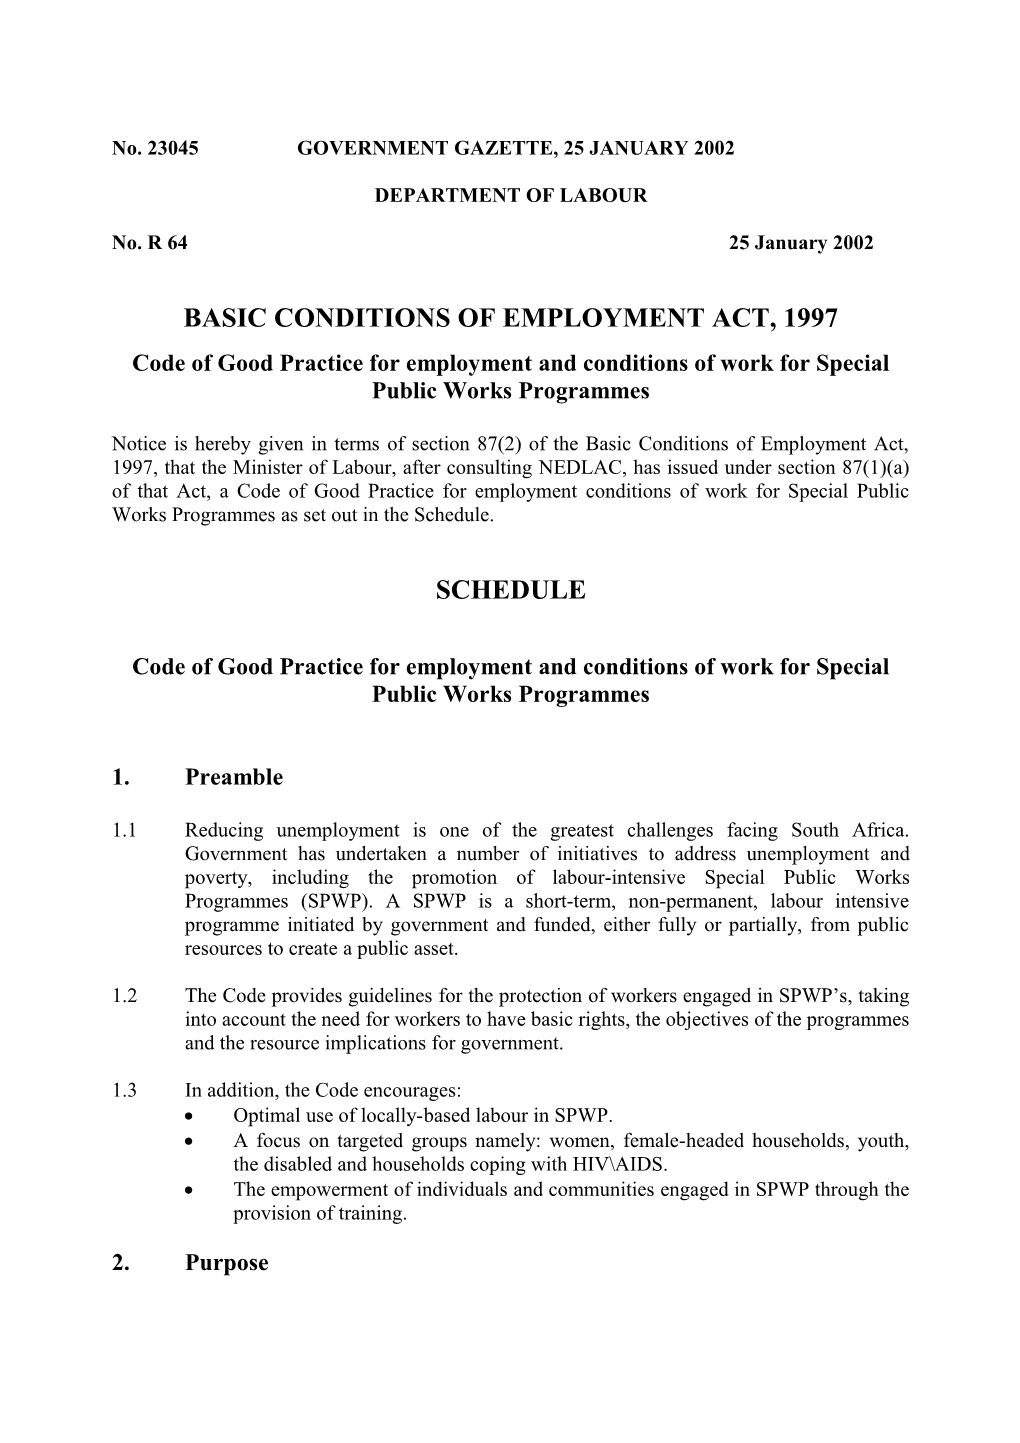 Code of Good Practice and Conditions of Employment and Remuneration on Public Works Programmes